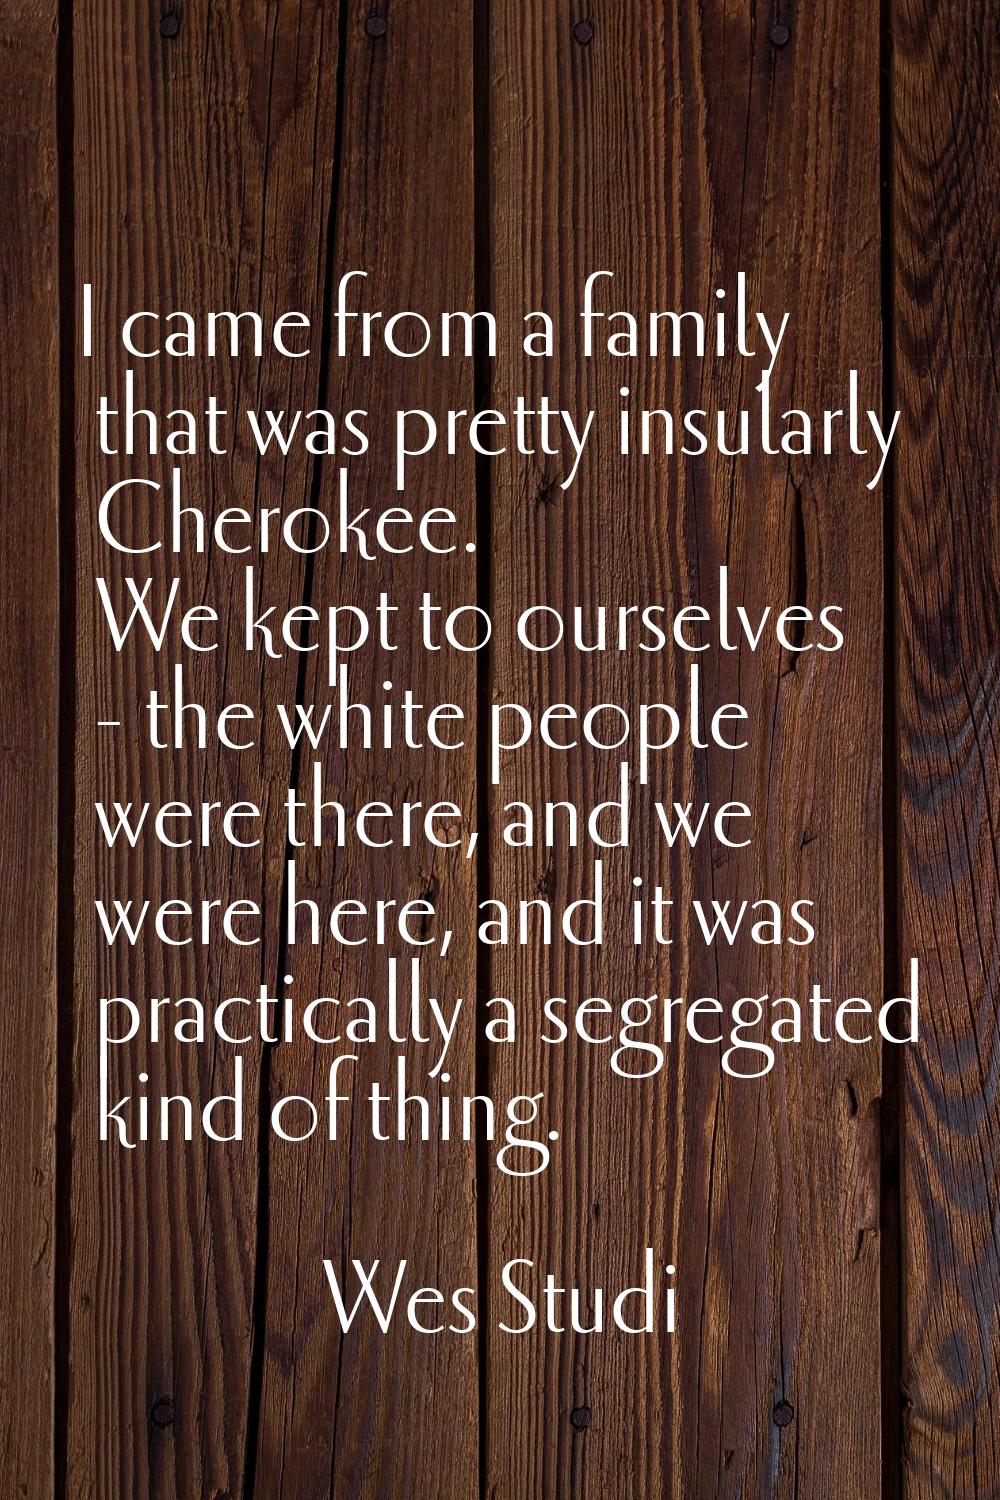 I came from a family that was pretty insularly Cherokee. We kept to ourselves - the white people we